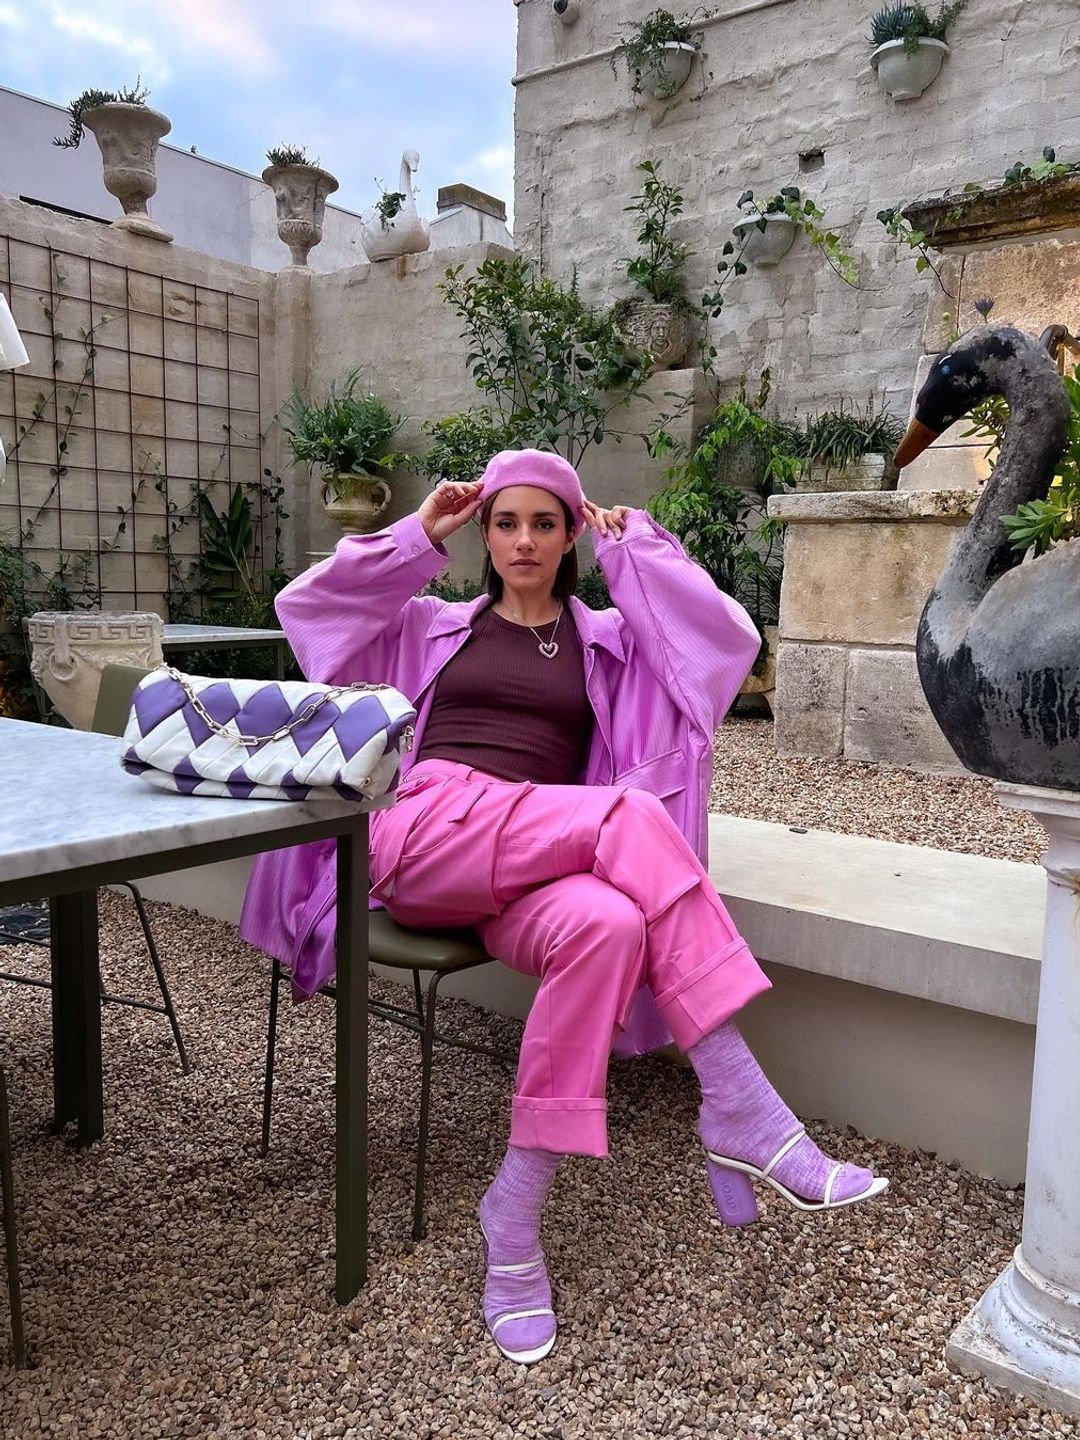 Influencer Maxine Wylde shows of her pink and purple outfit proving colour coordination is very on trend